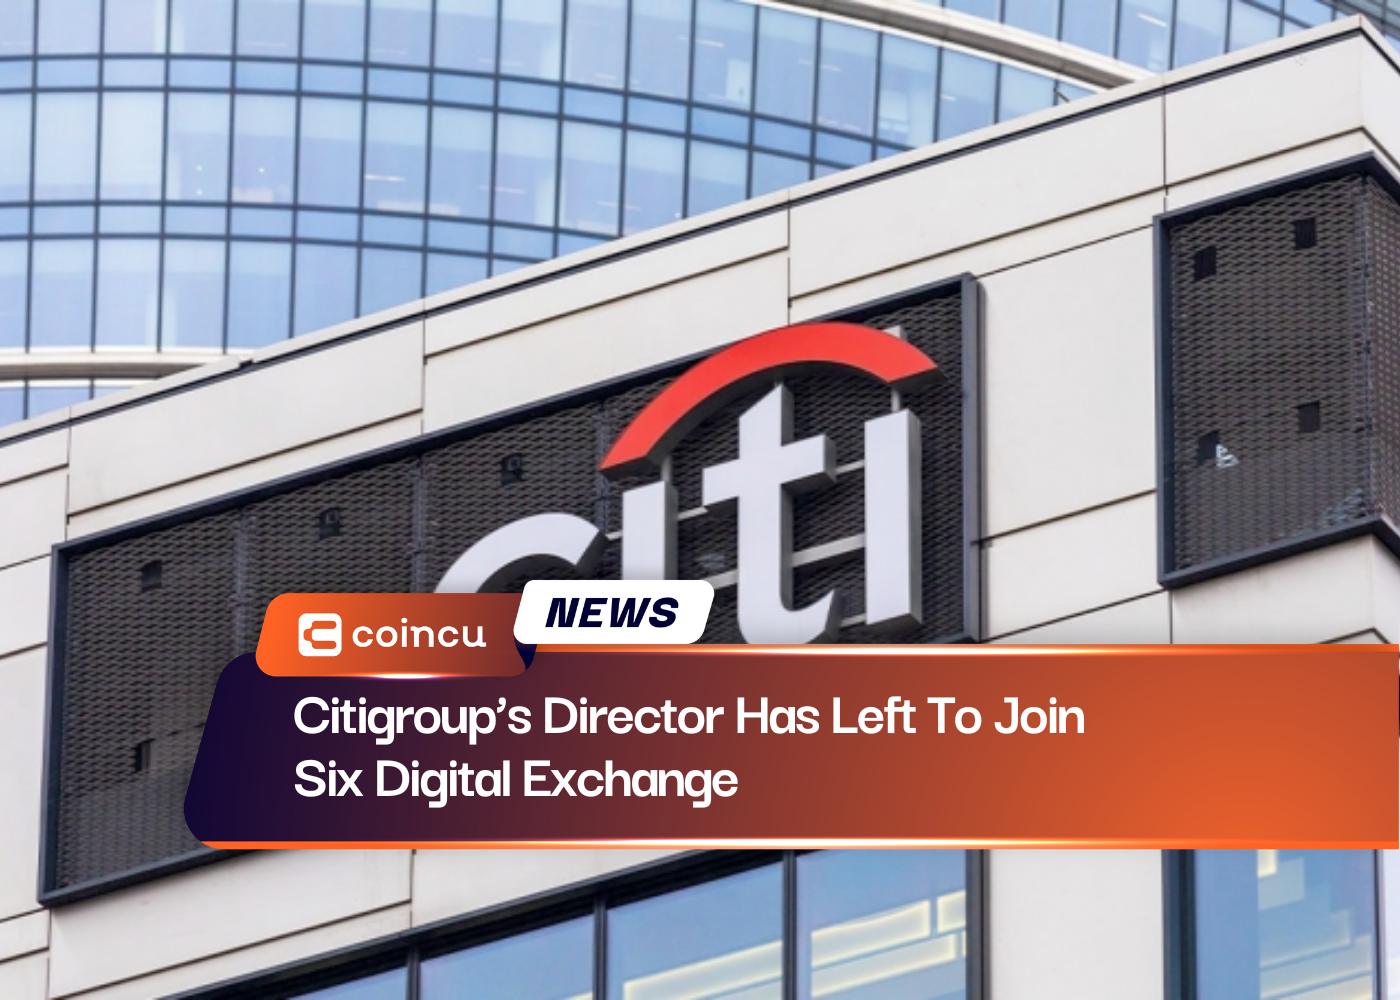 Citigroup’s Director Has Left To Join Six Digital Exchange